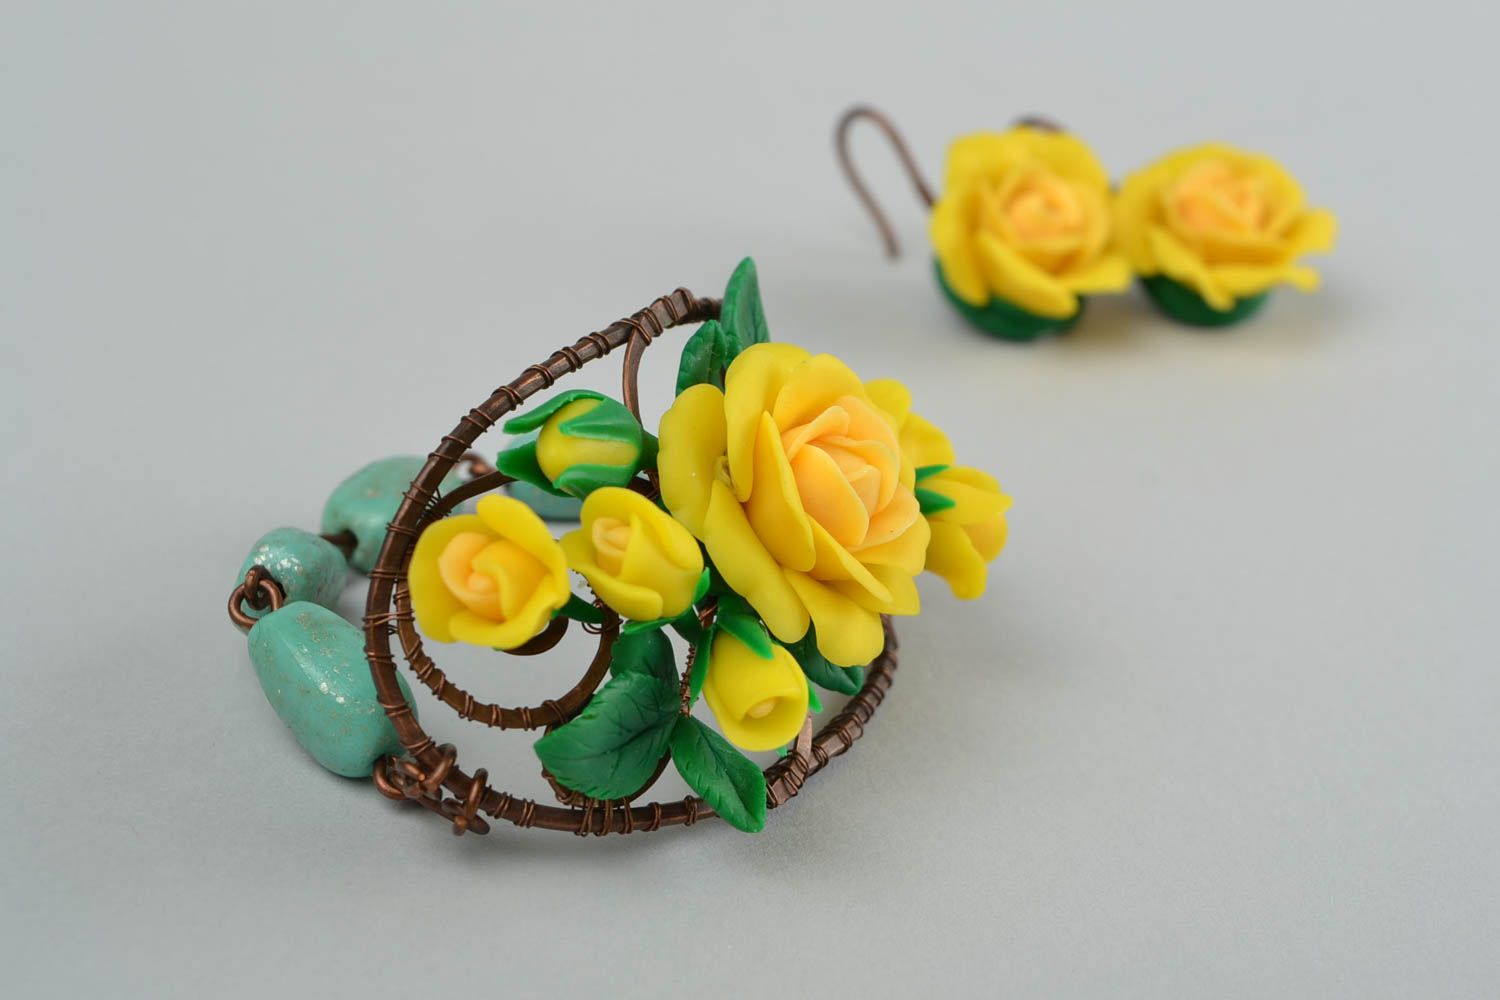 Homemade charm jewelry set yellow roses flower cuff bracelet and earrings for women and girls photo 5